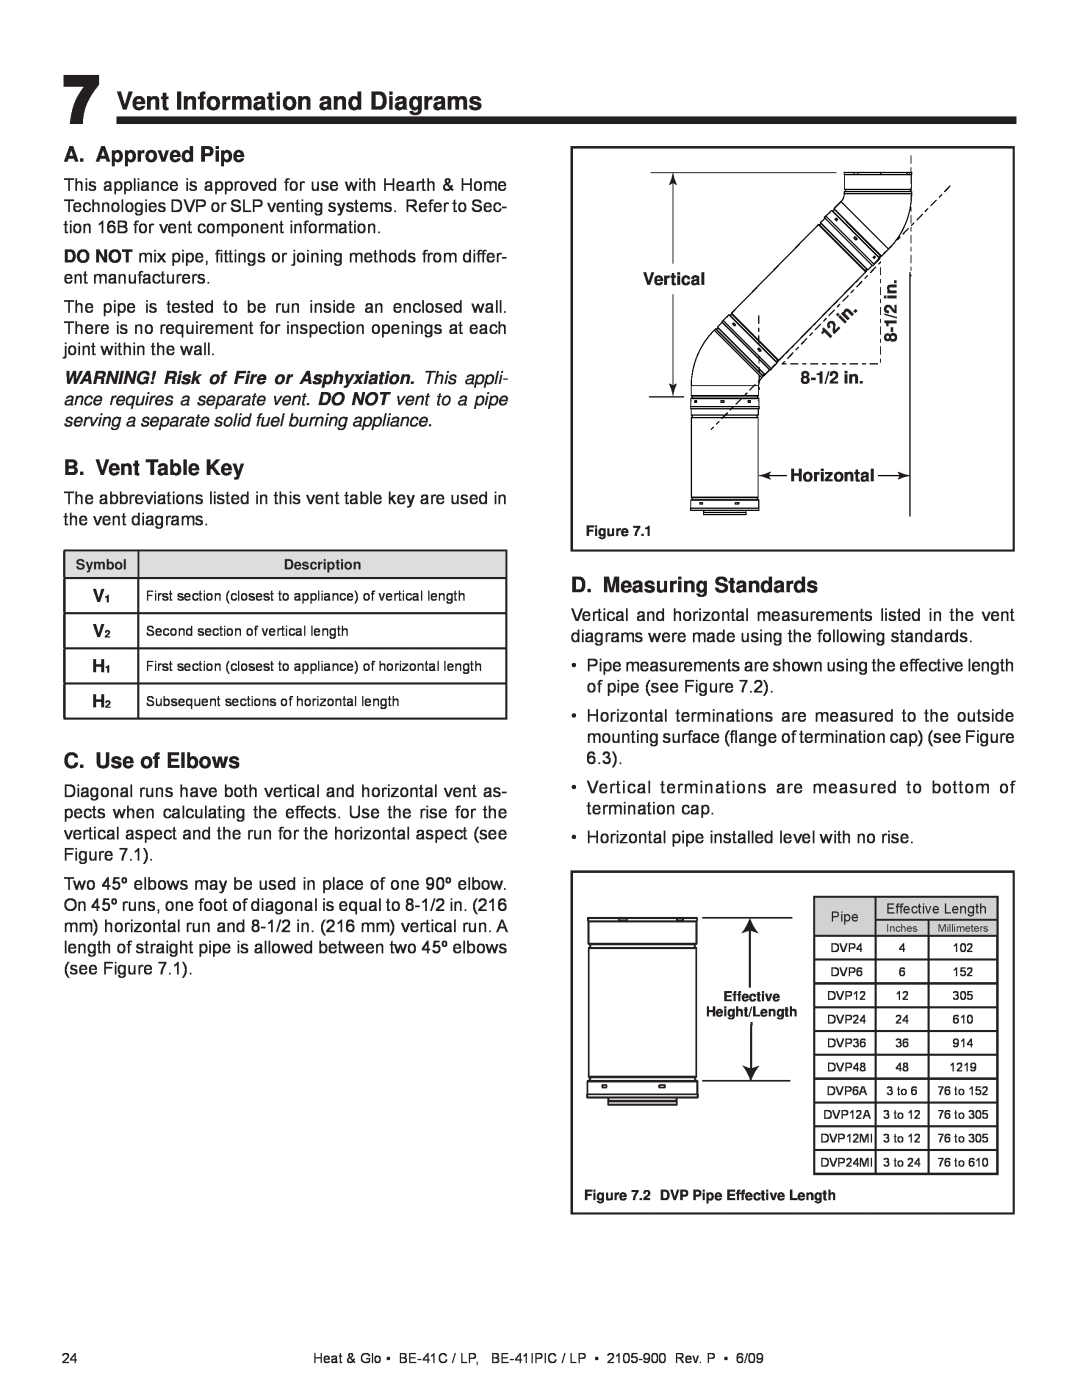 Heat & Glo LifeStyle BE-41C, BE-41LPC Vent Information and Diagrams, A. Approved Pipe, B. Vent Table Key, C. Use of Elbows 